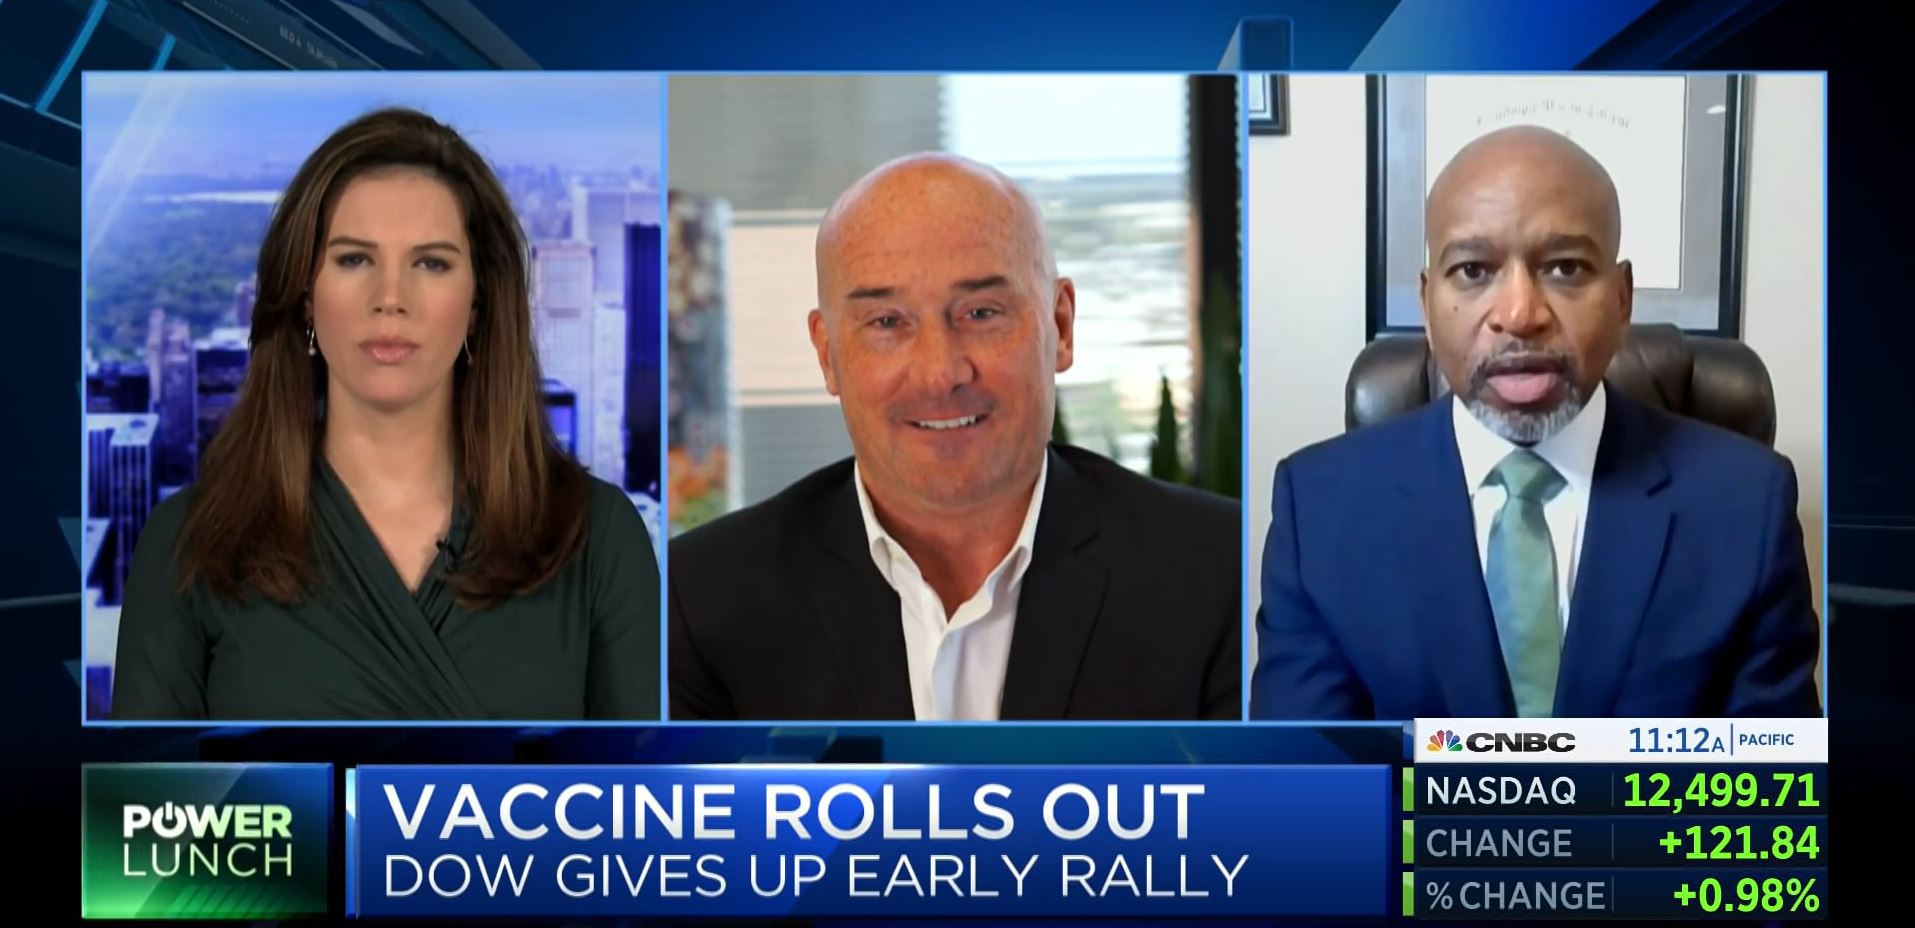 CNBC’s Power Lunch: The Initial Vaccine Impact